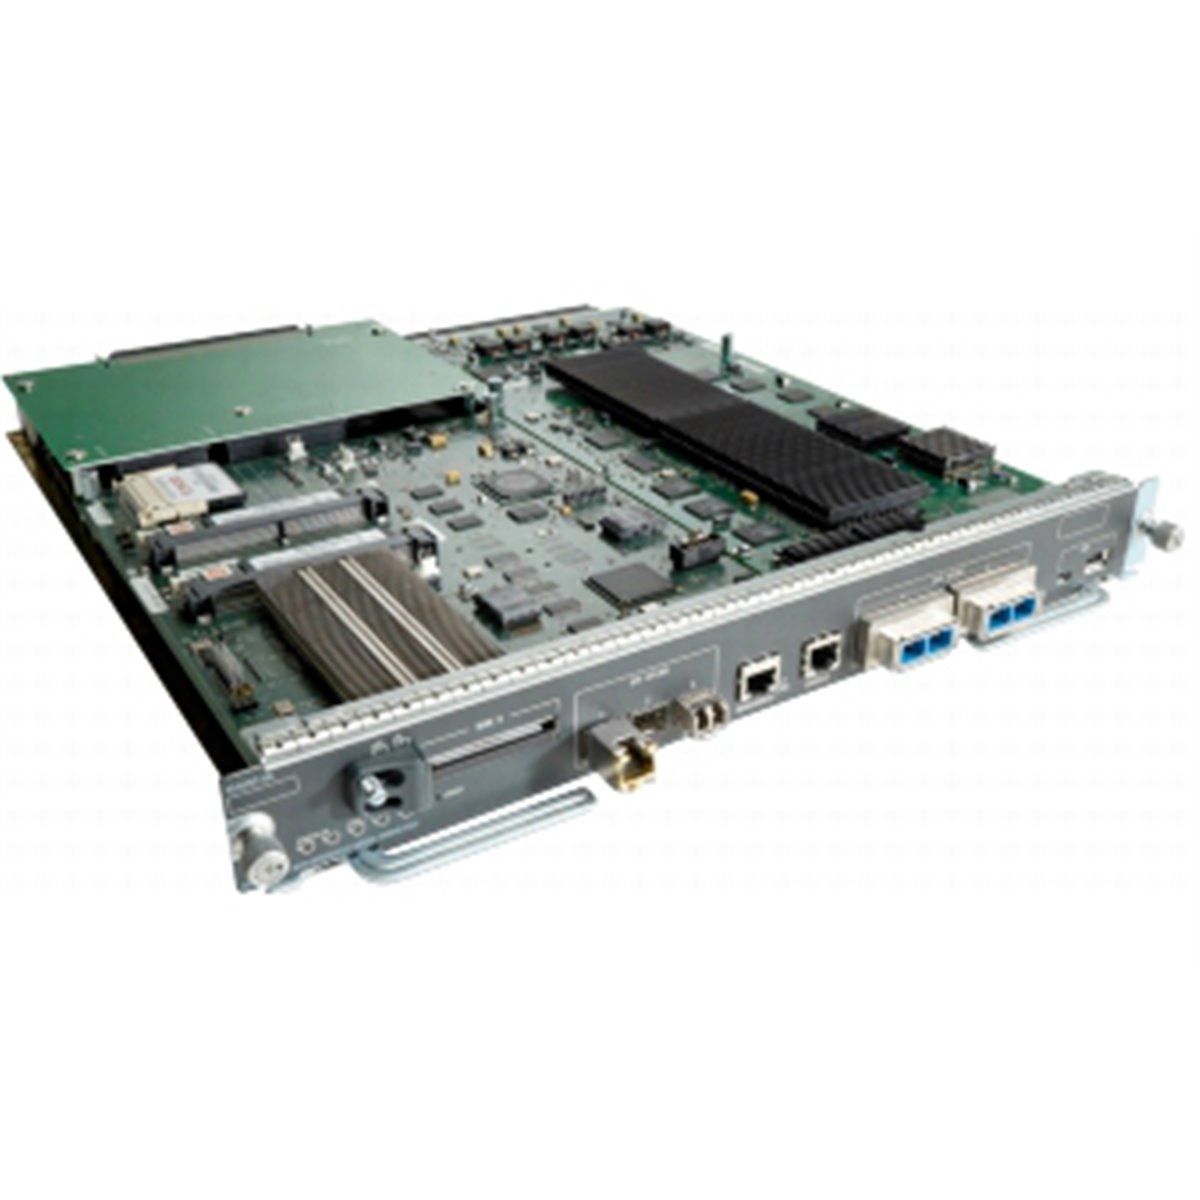 Cisco Cat 6500 Sup 2T with 2 x 10GbE and 3